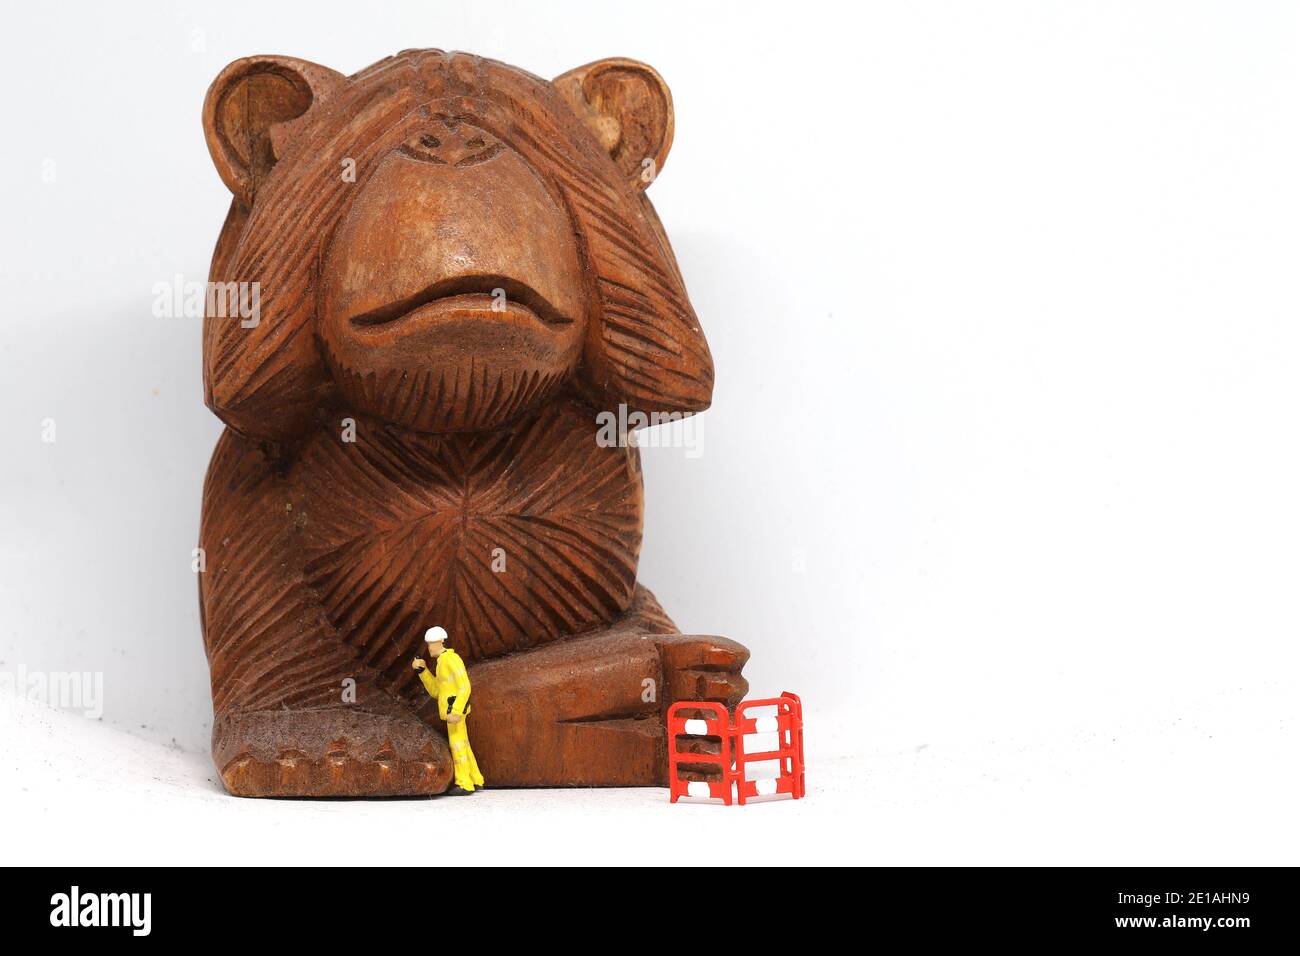 See No Evil wooden monkey ornament being cleaned up by tiny workmen. Stock Photo